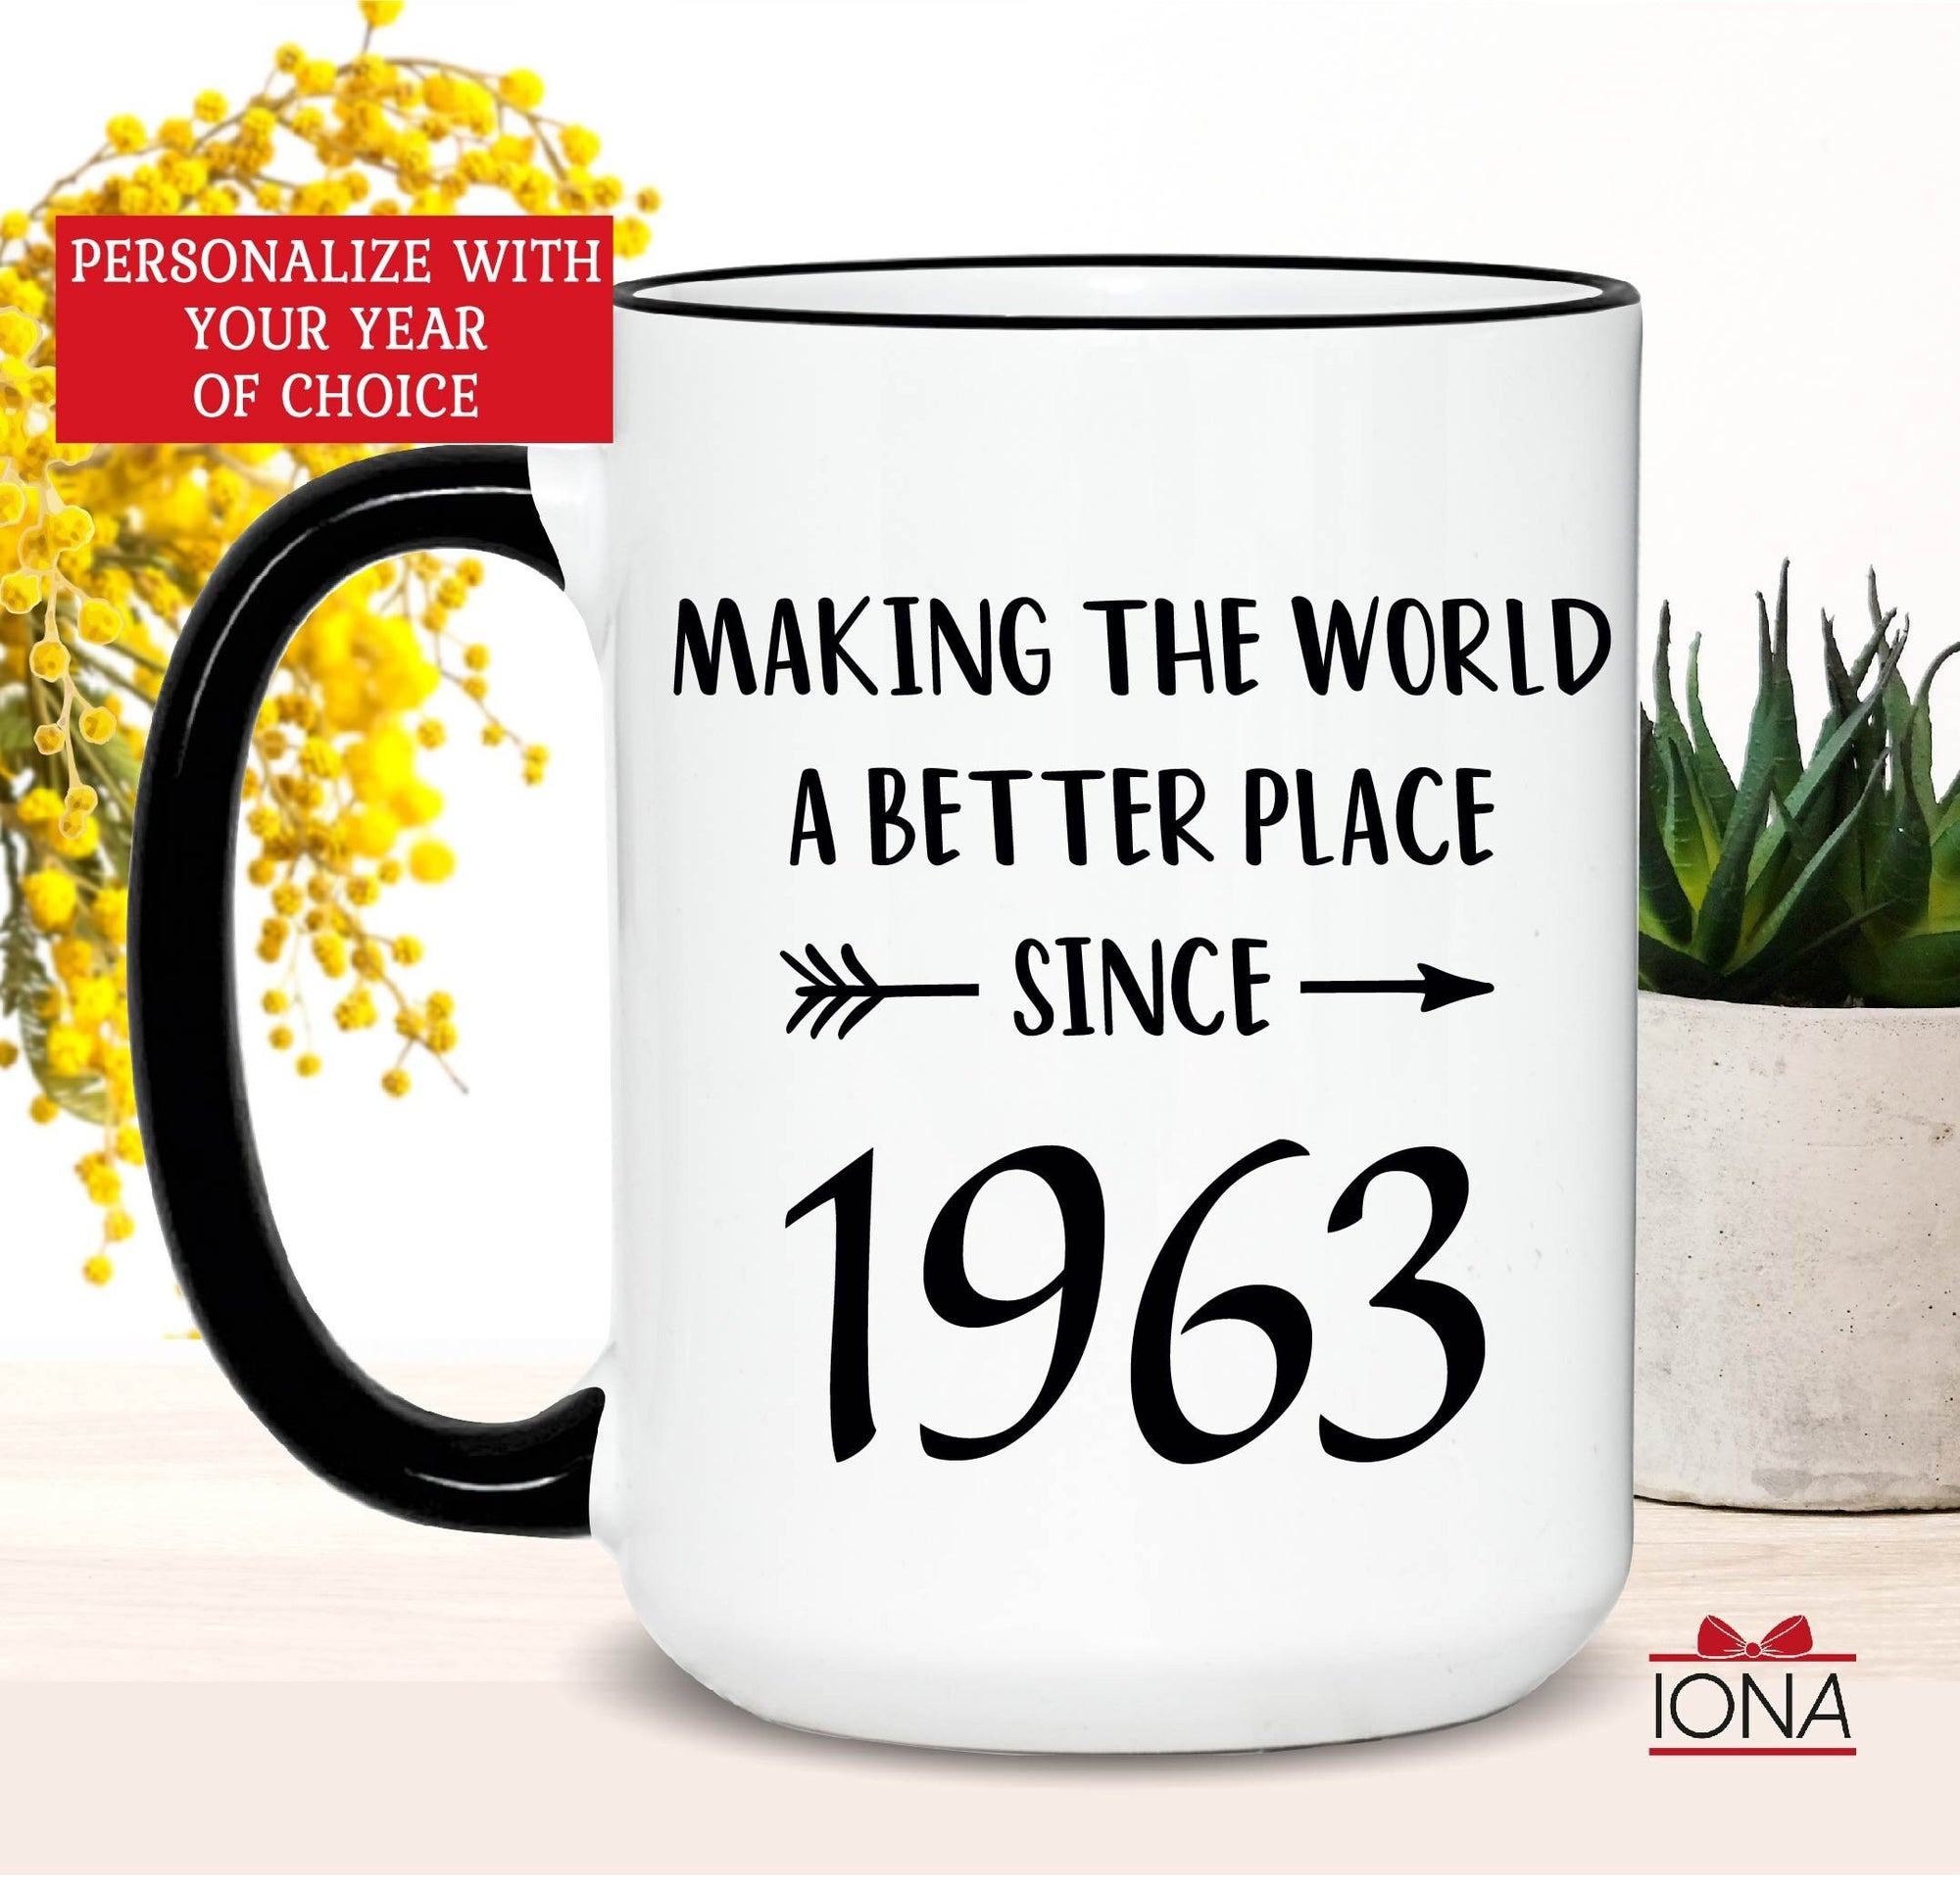 60th Birthday Gift, Personalized 60th Birthday Coffee Mug, Born in 1963, Making the world a better place since 1963, Best Friends 60th Gifts